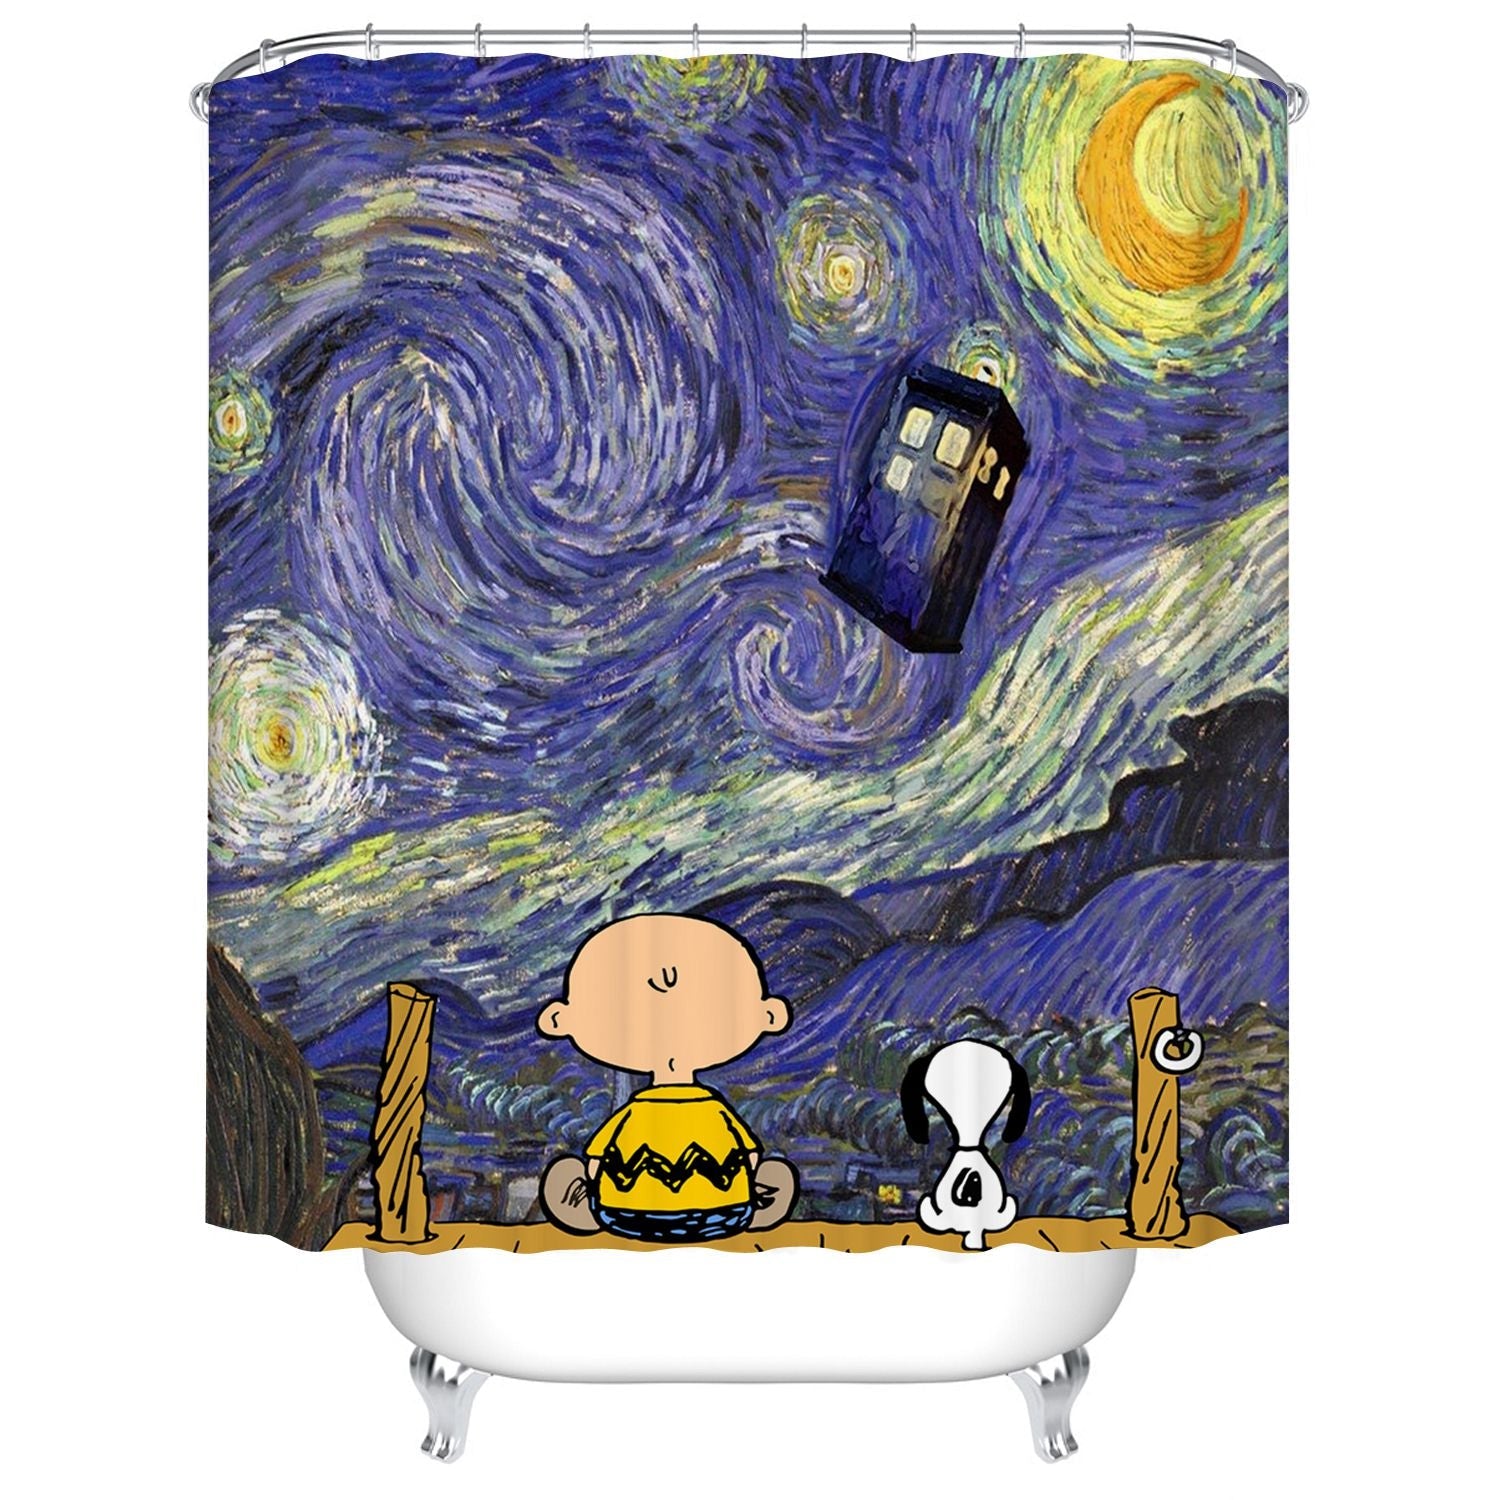 Starry Night with Police Box Cartoon Shower Curtain